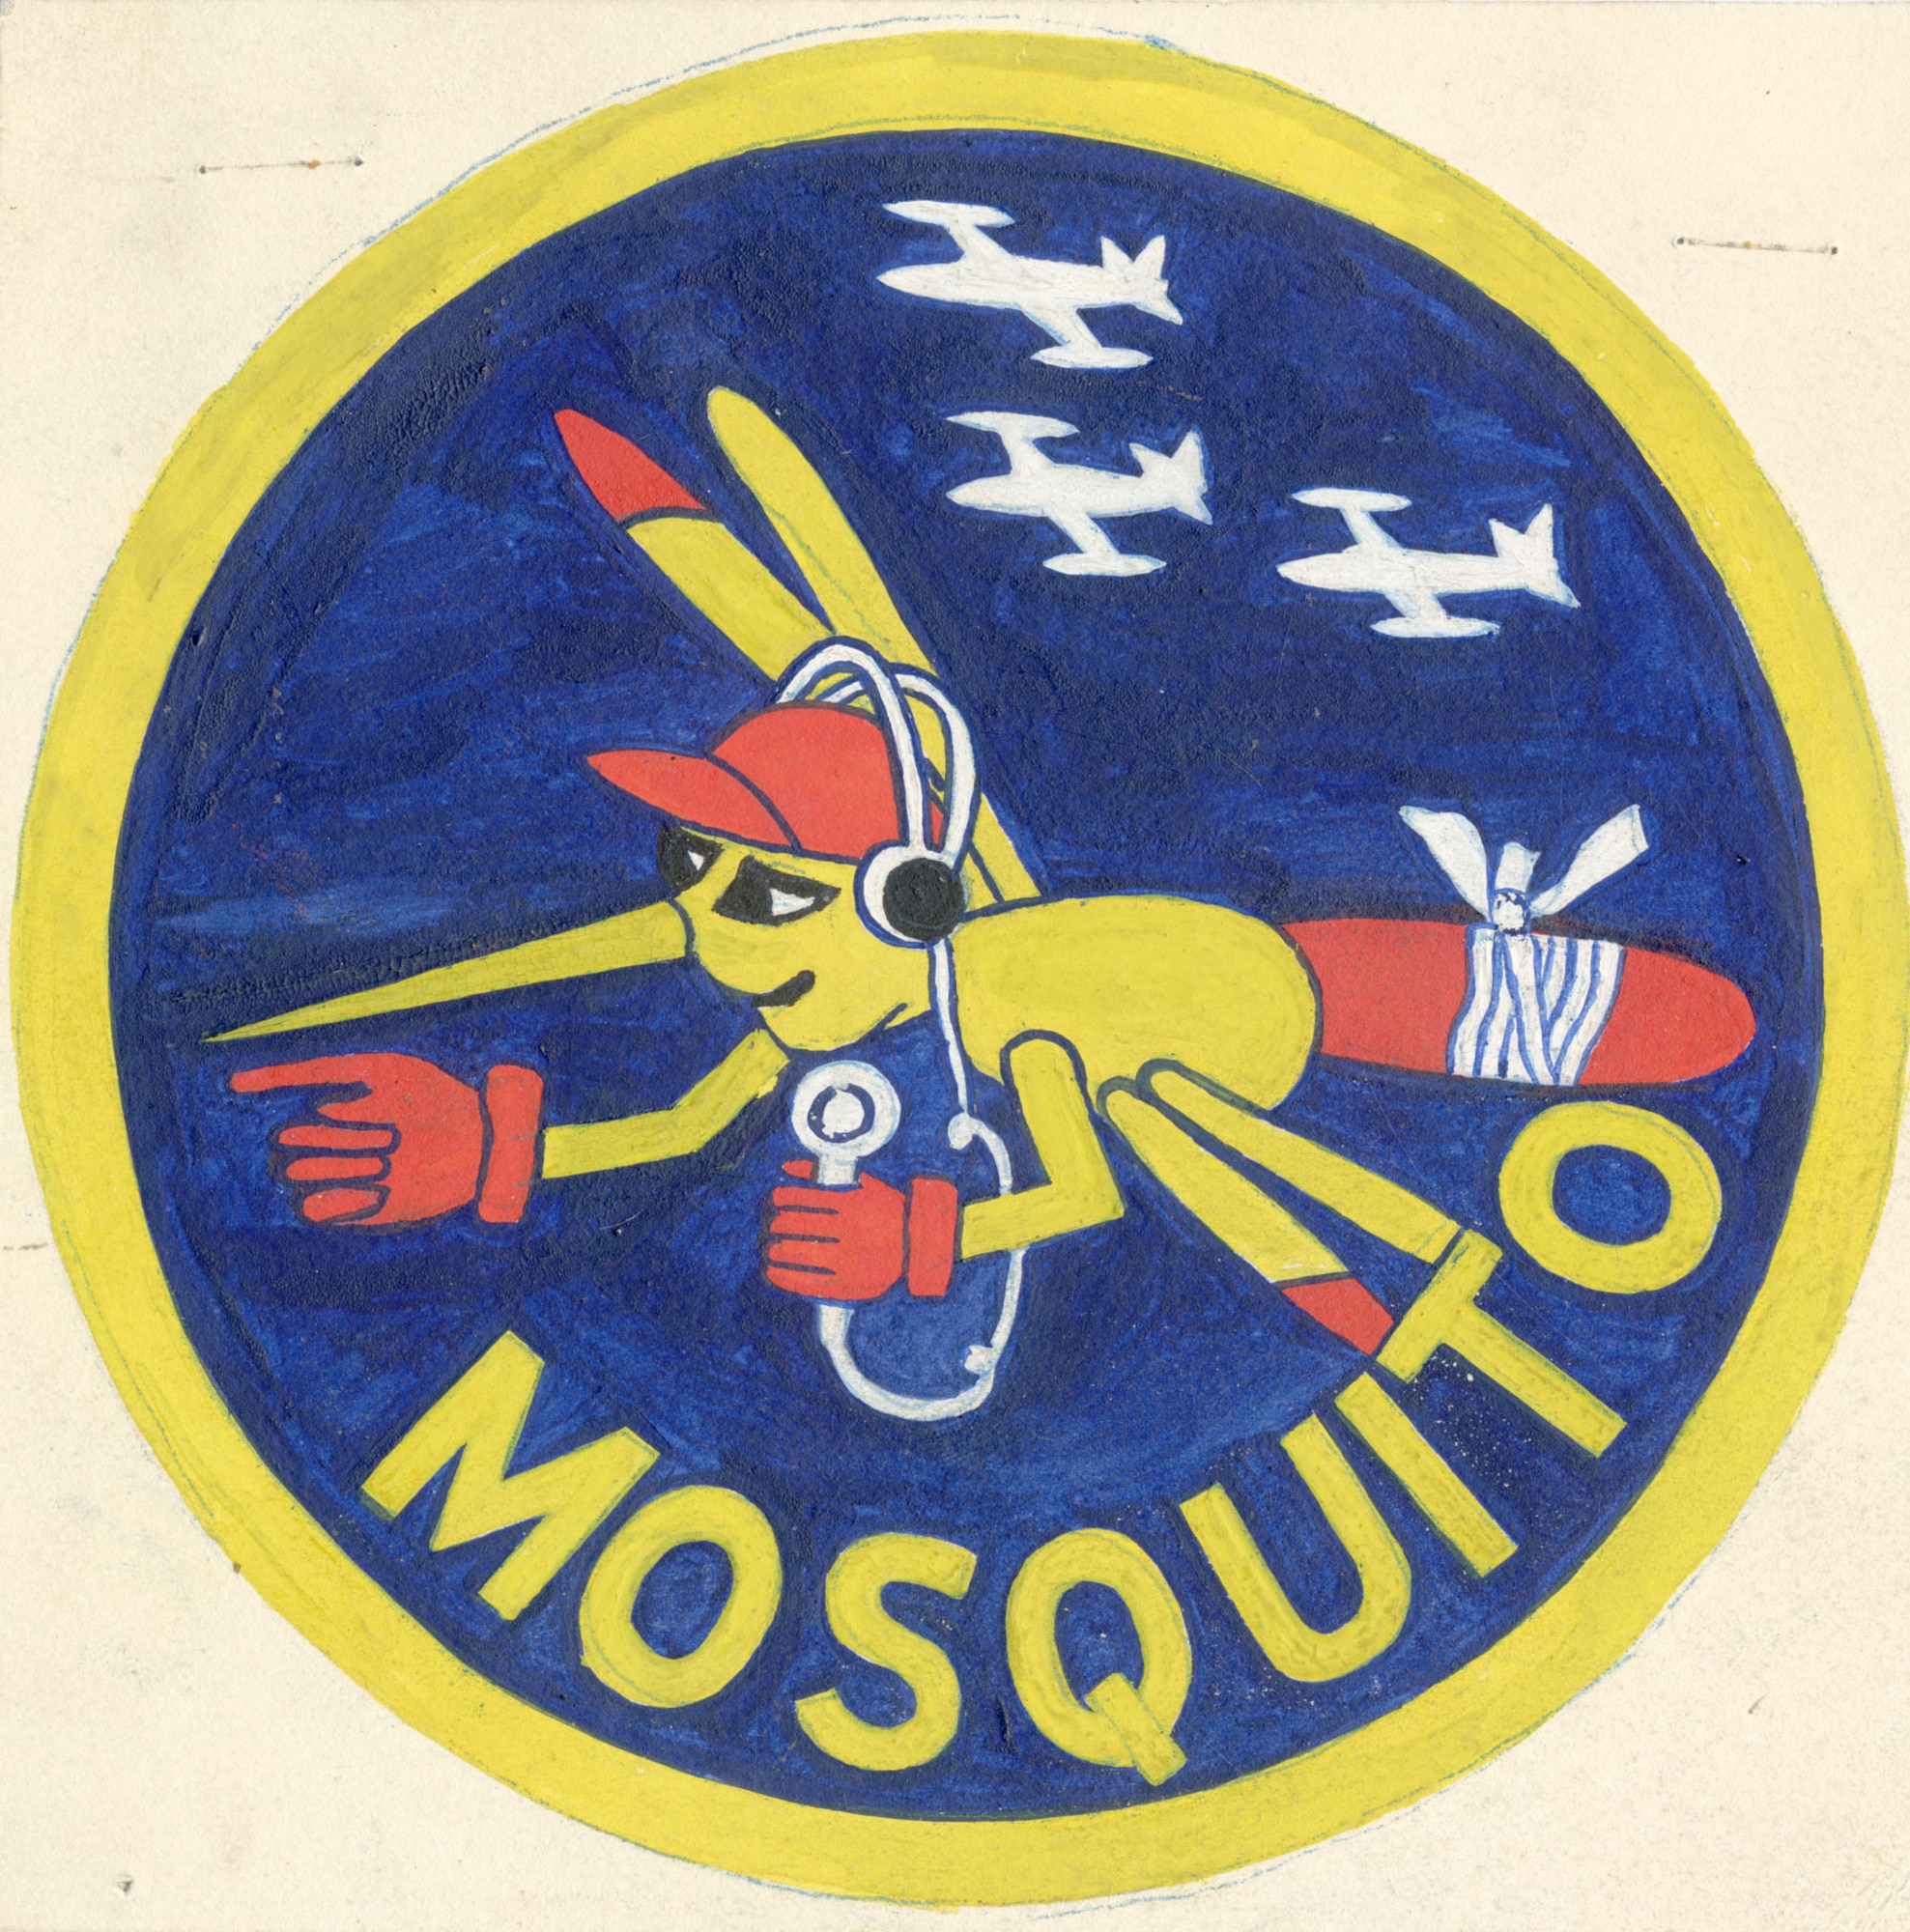 Copy of the original artwork used to create the Mosquito patch. (U.S. Air Force photo)